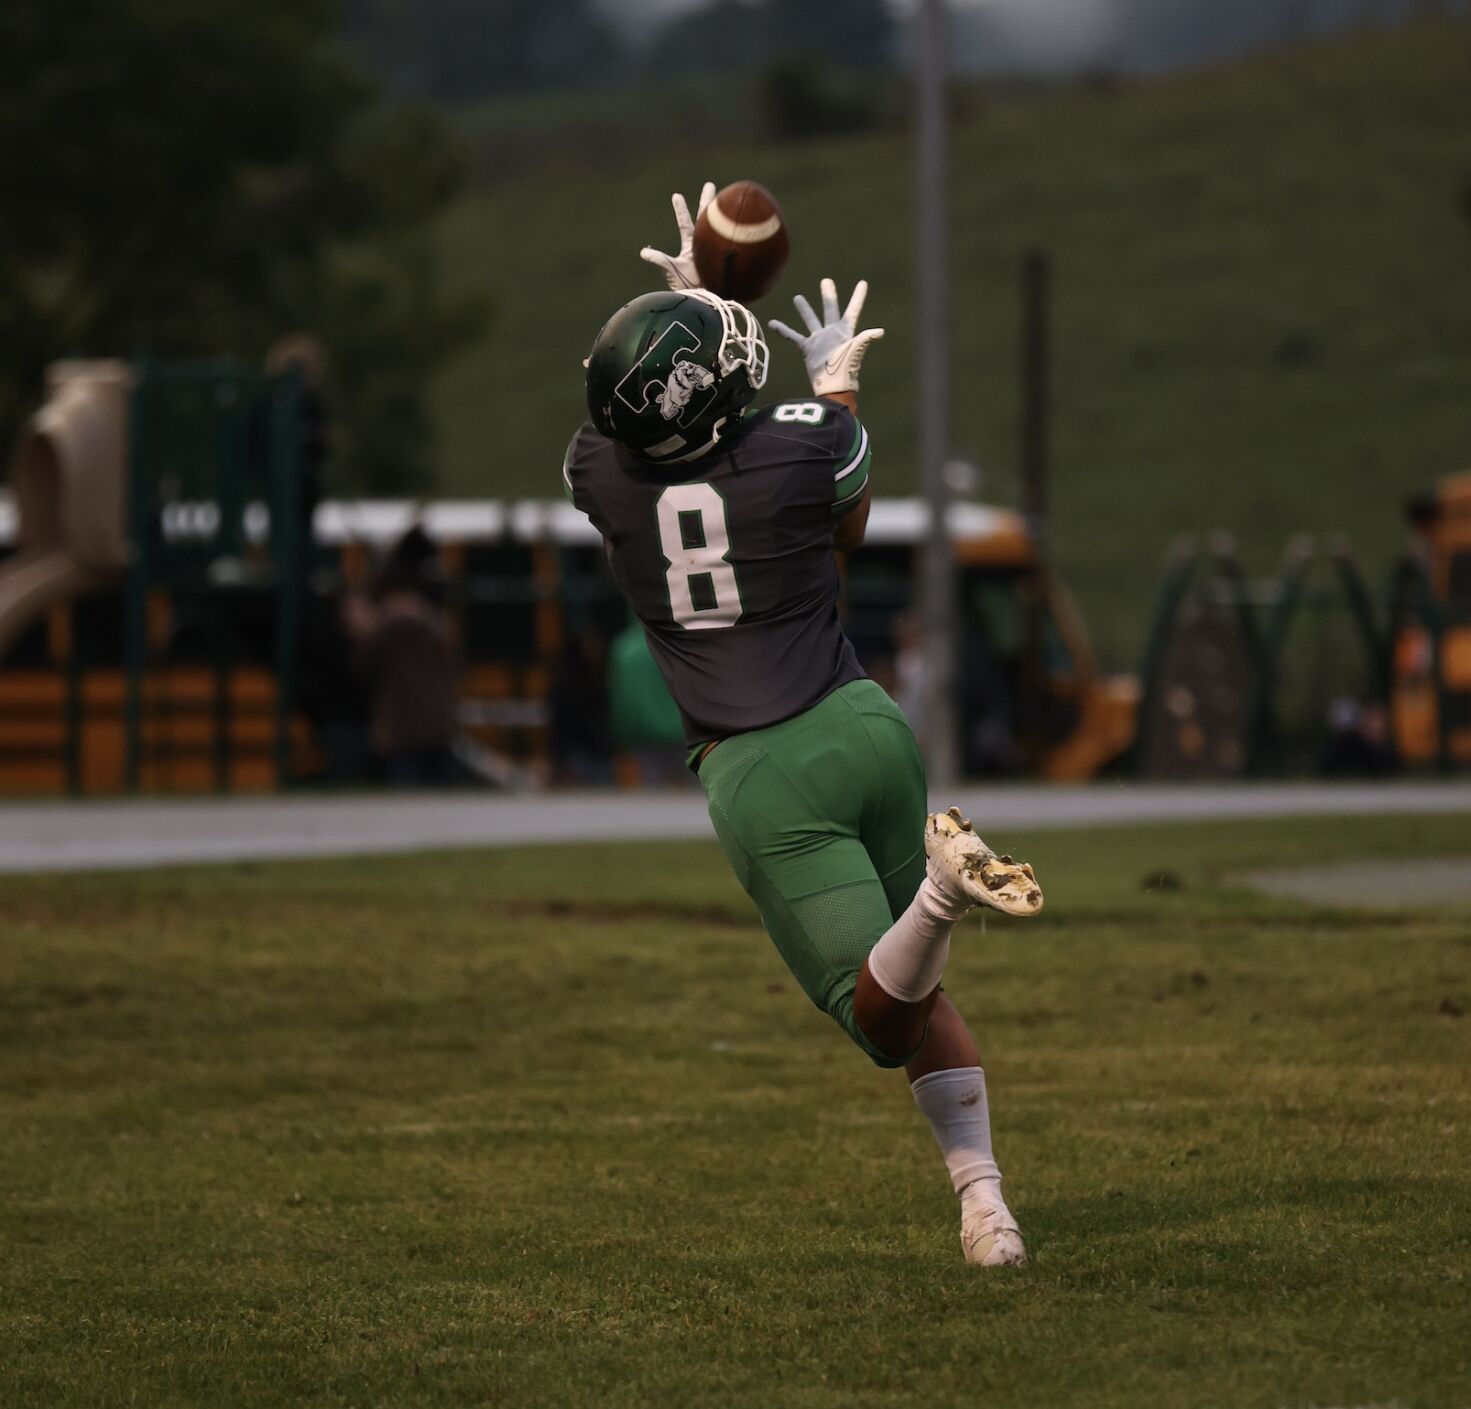 Logan McDonald Makes Tazewell Football History with Over 1,000 Receiving Yards in a Single Season